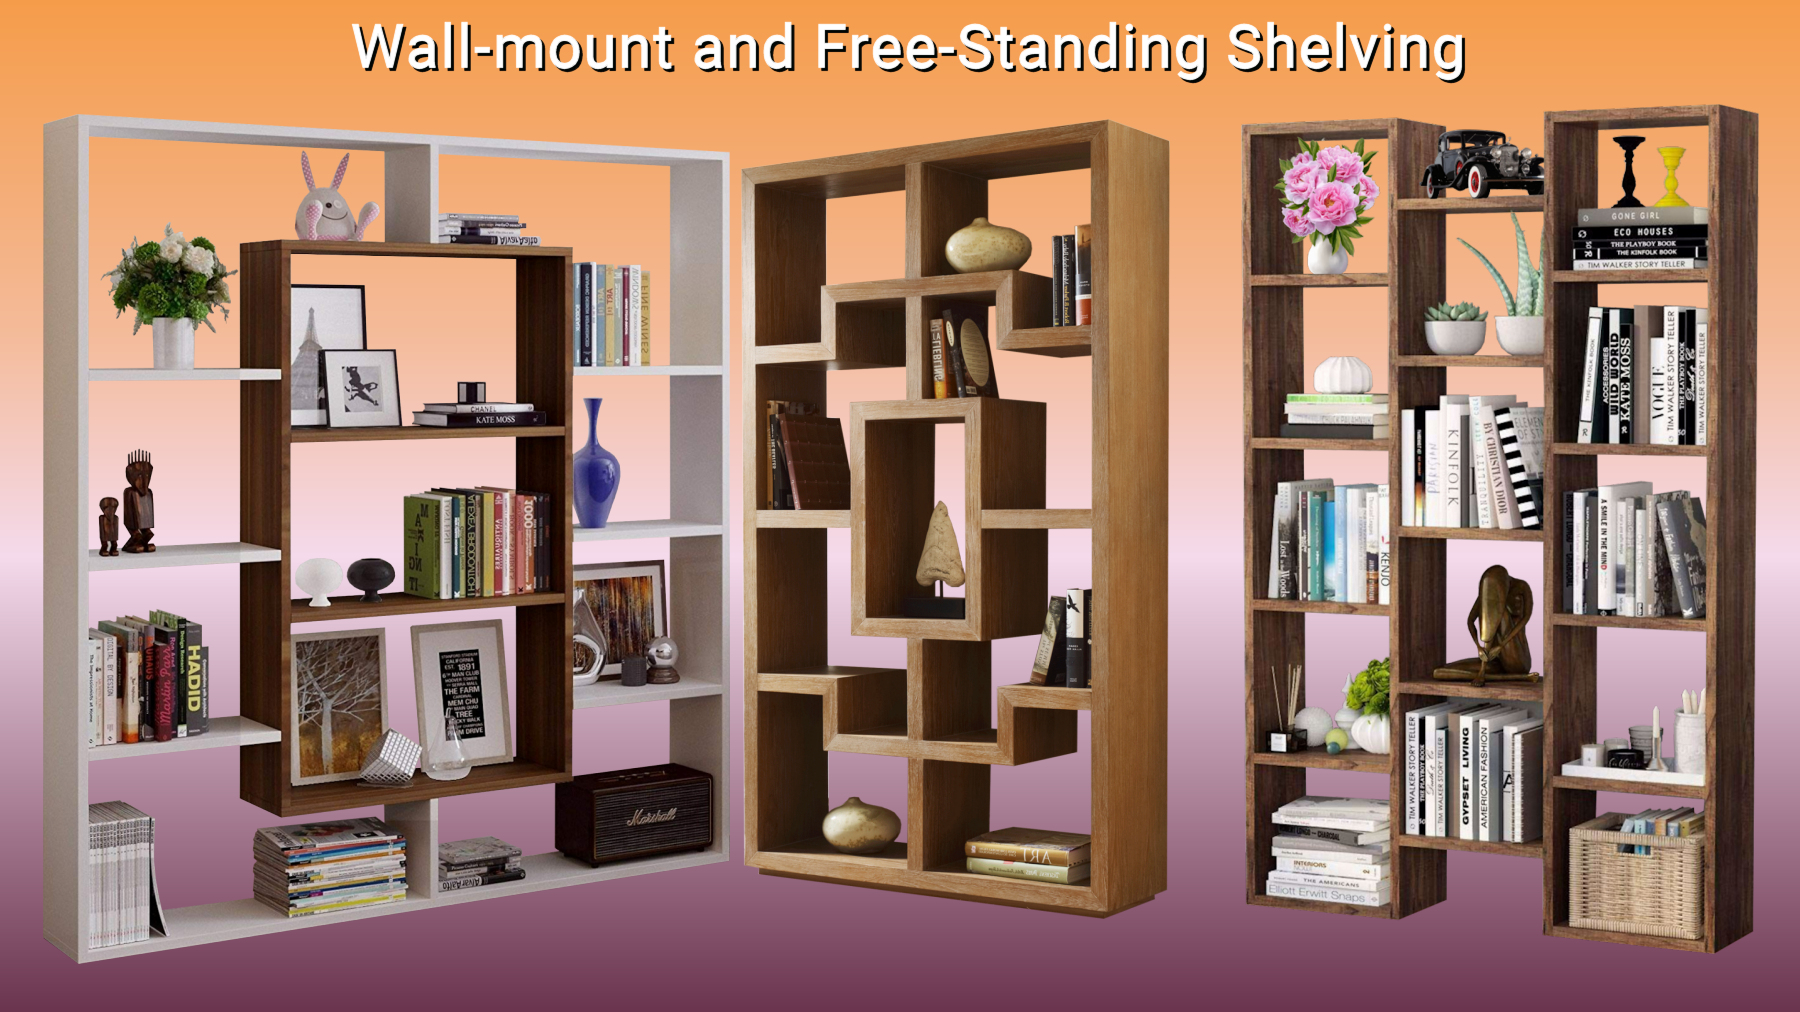 Wall-mount and Free-Standing Shelving